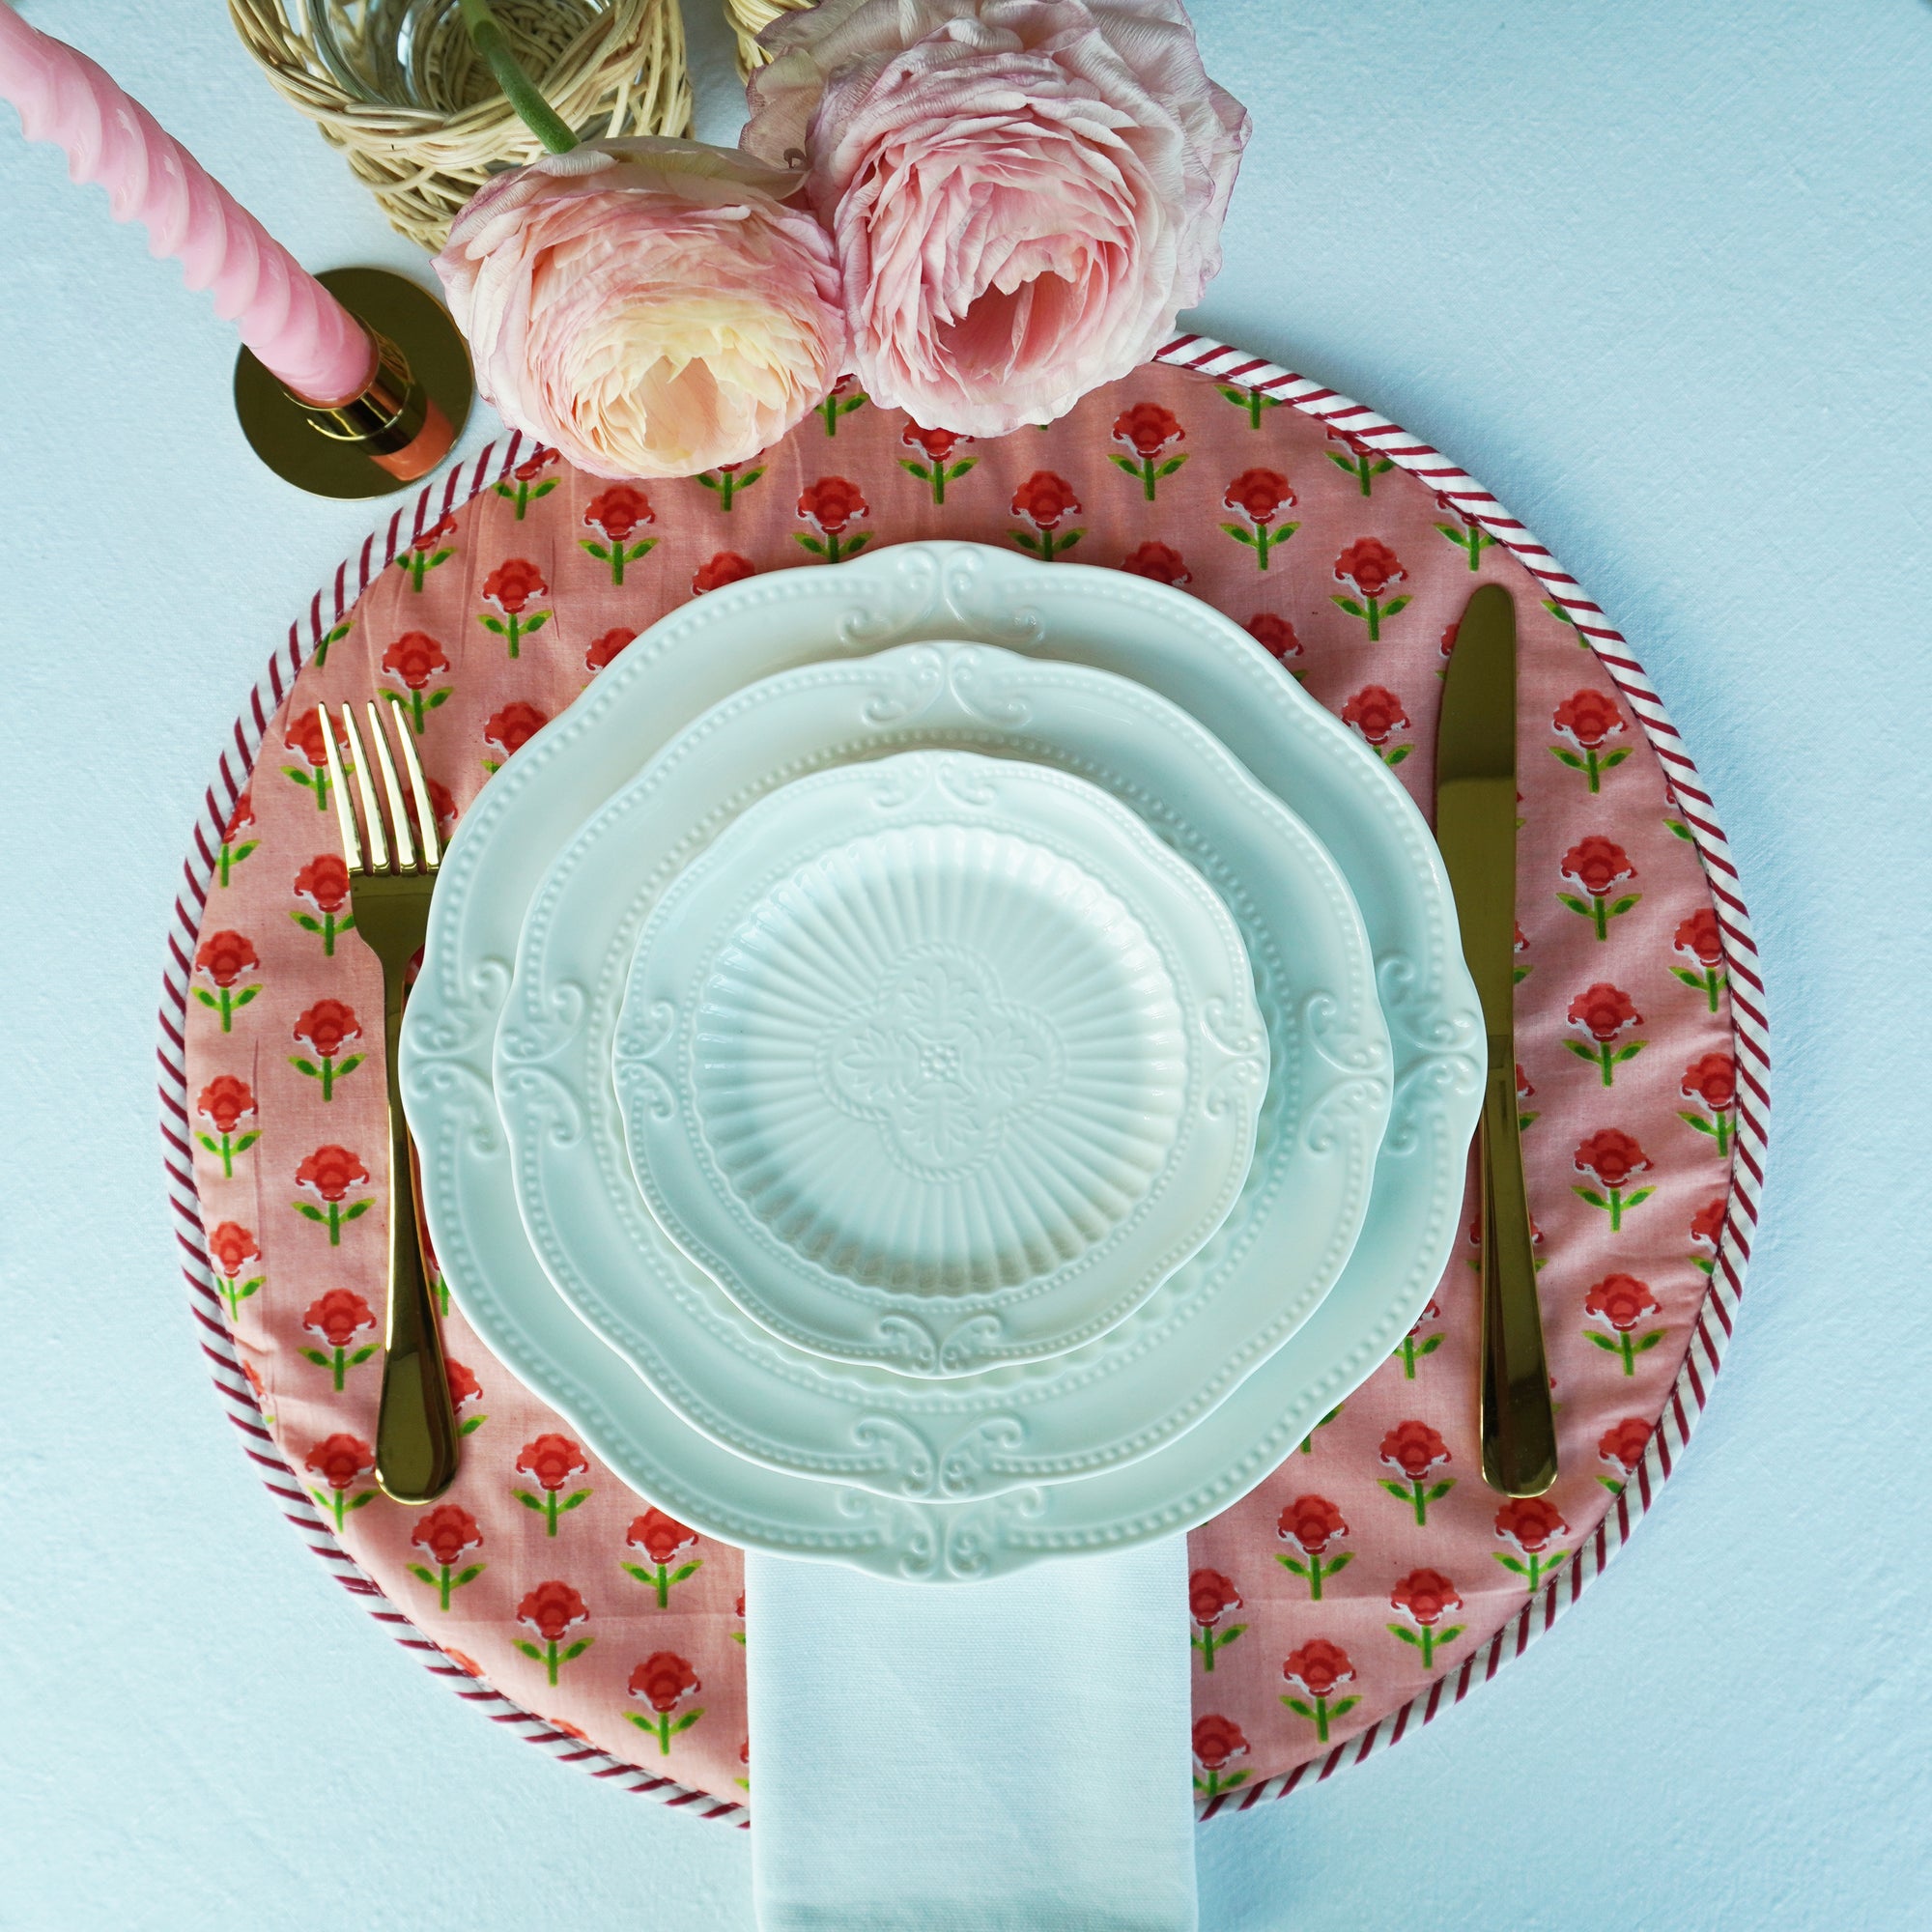 Floral Candy Cane Striped Block Print Placemat